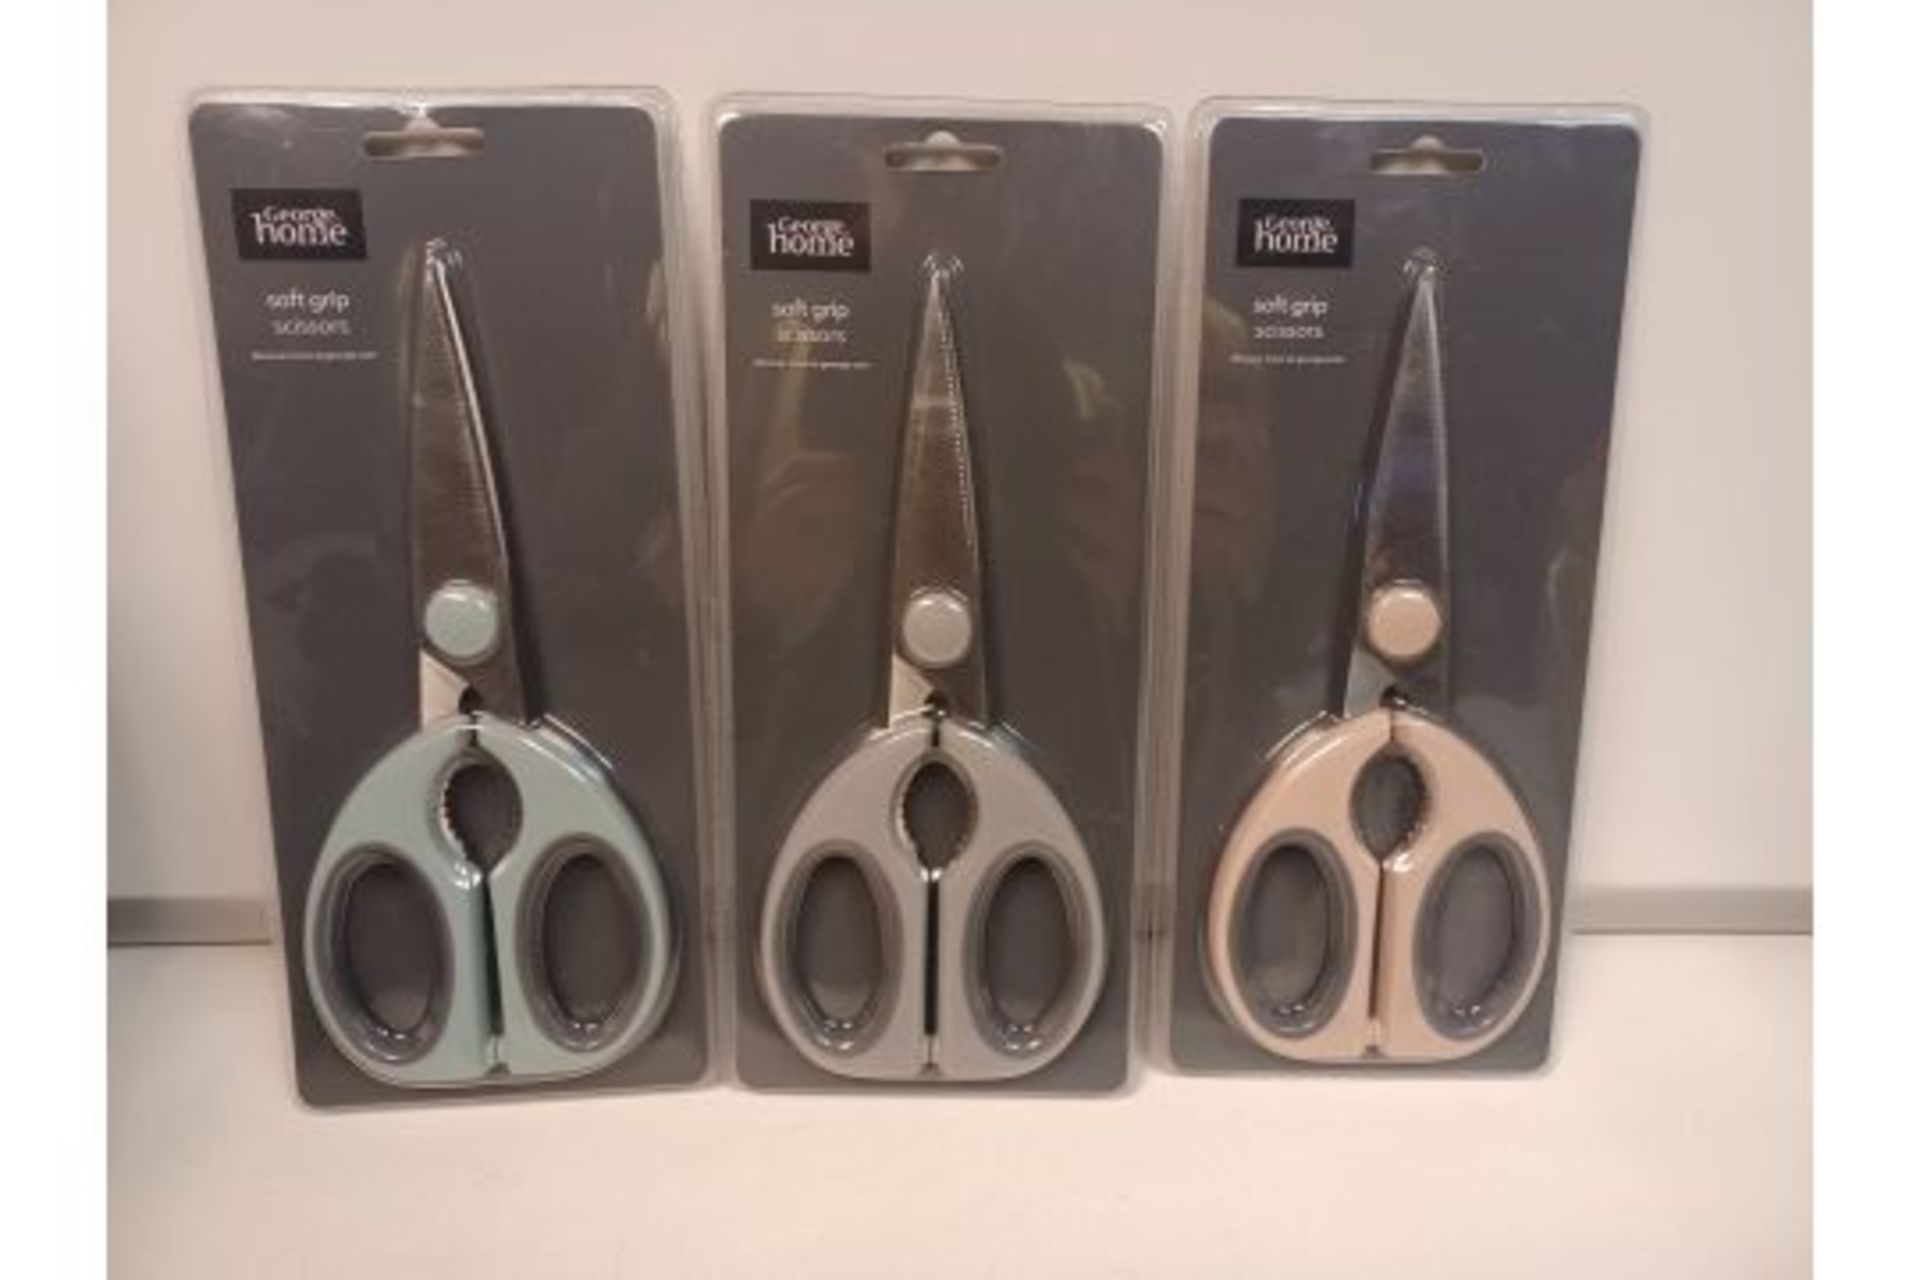 72 X GEORGE HOME SOFT GRIP SCISSORS IN ASSORTED COLOURS (ROW18/CHECKBOARD)